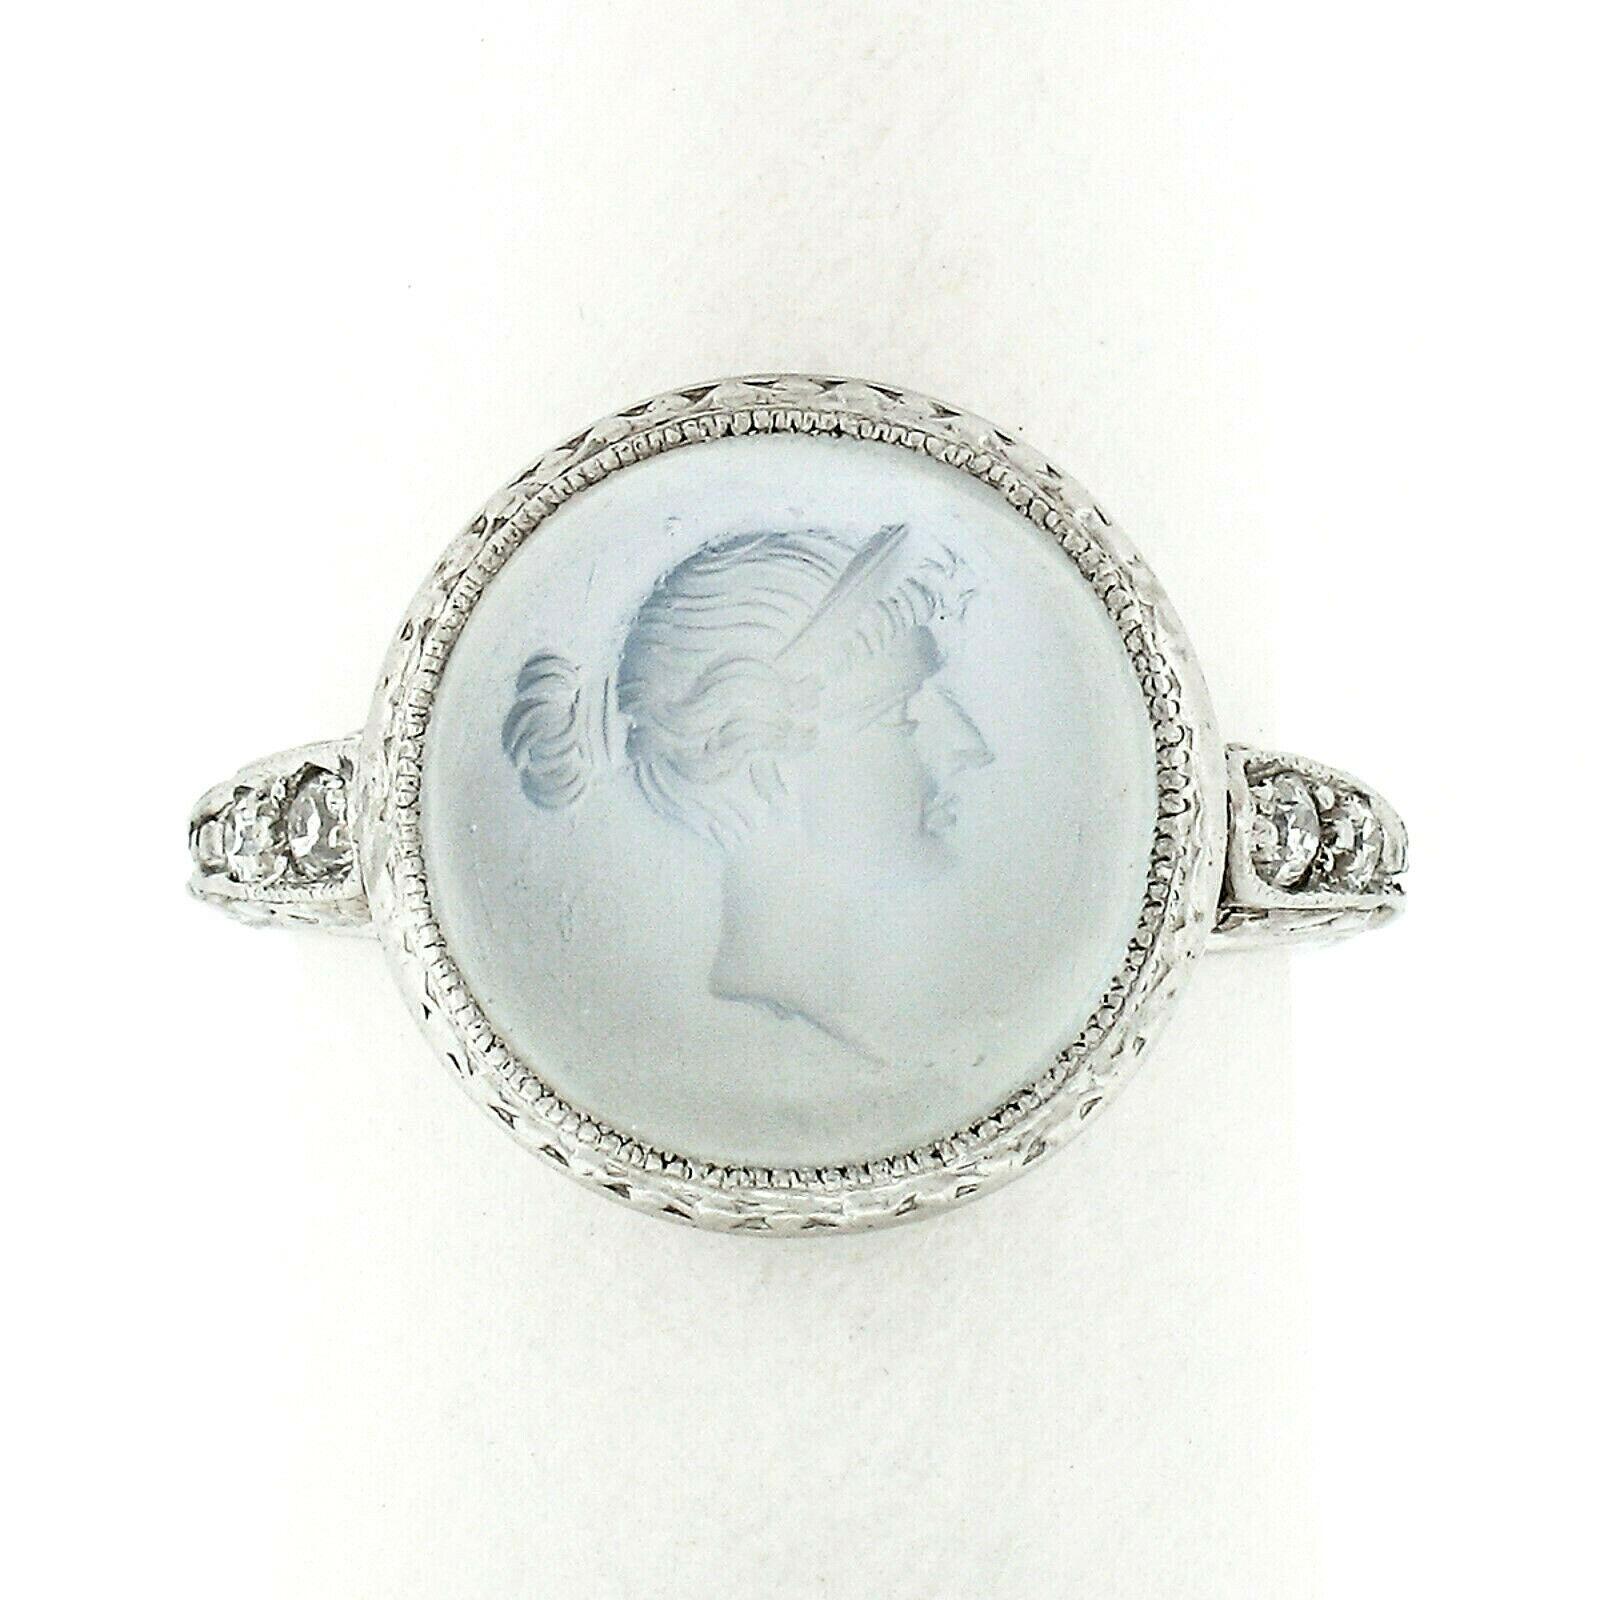 This magnificent antique cocktail ring was crafted from solid 900 platinum during the art deco period and features a carved moonstone intaglio solitaire at its center. The stone displays a very fine translucent blue color which is bezel set and